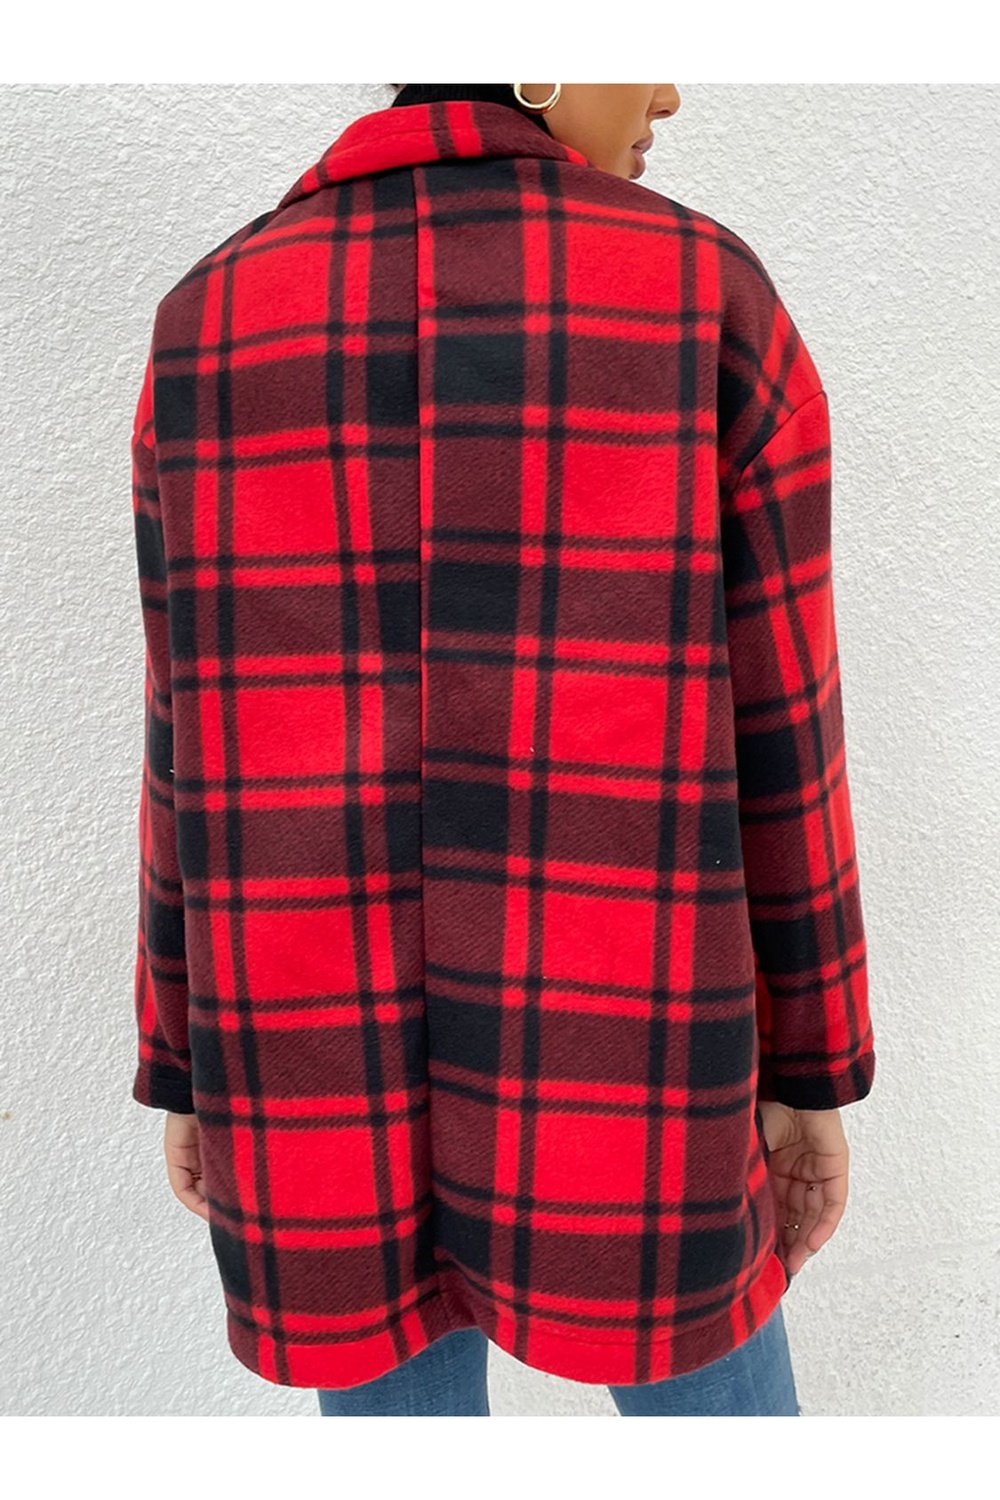 Plaid Lapel Collar Coat with Pockets - Jackets - FITGGINS